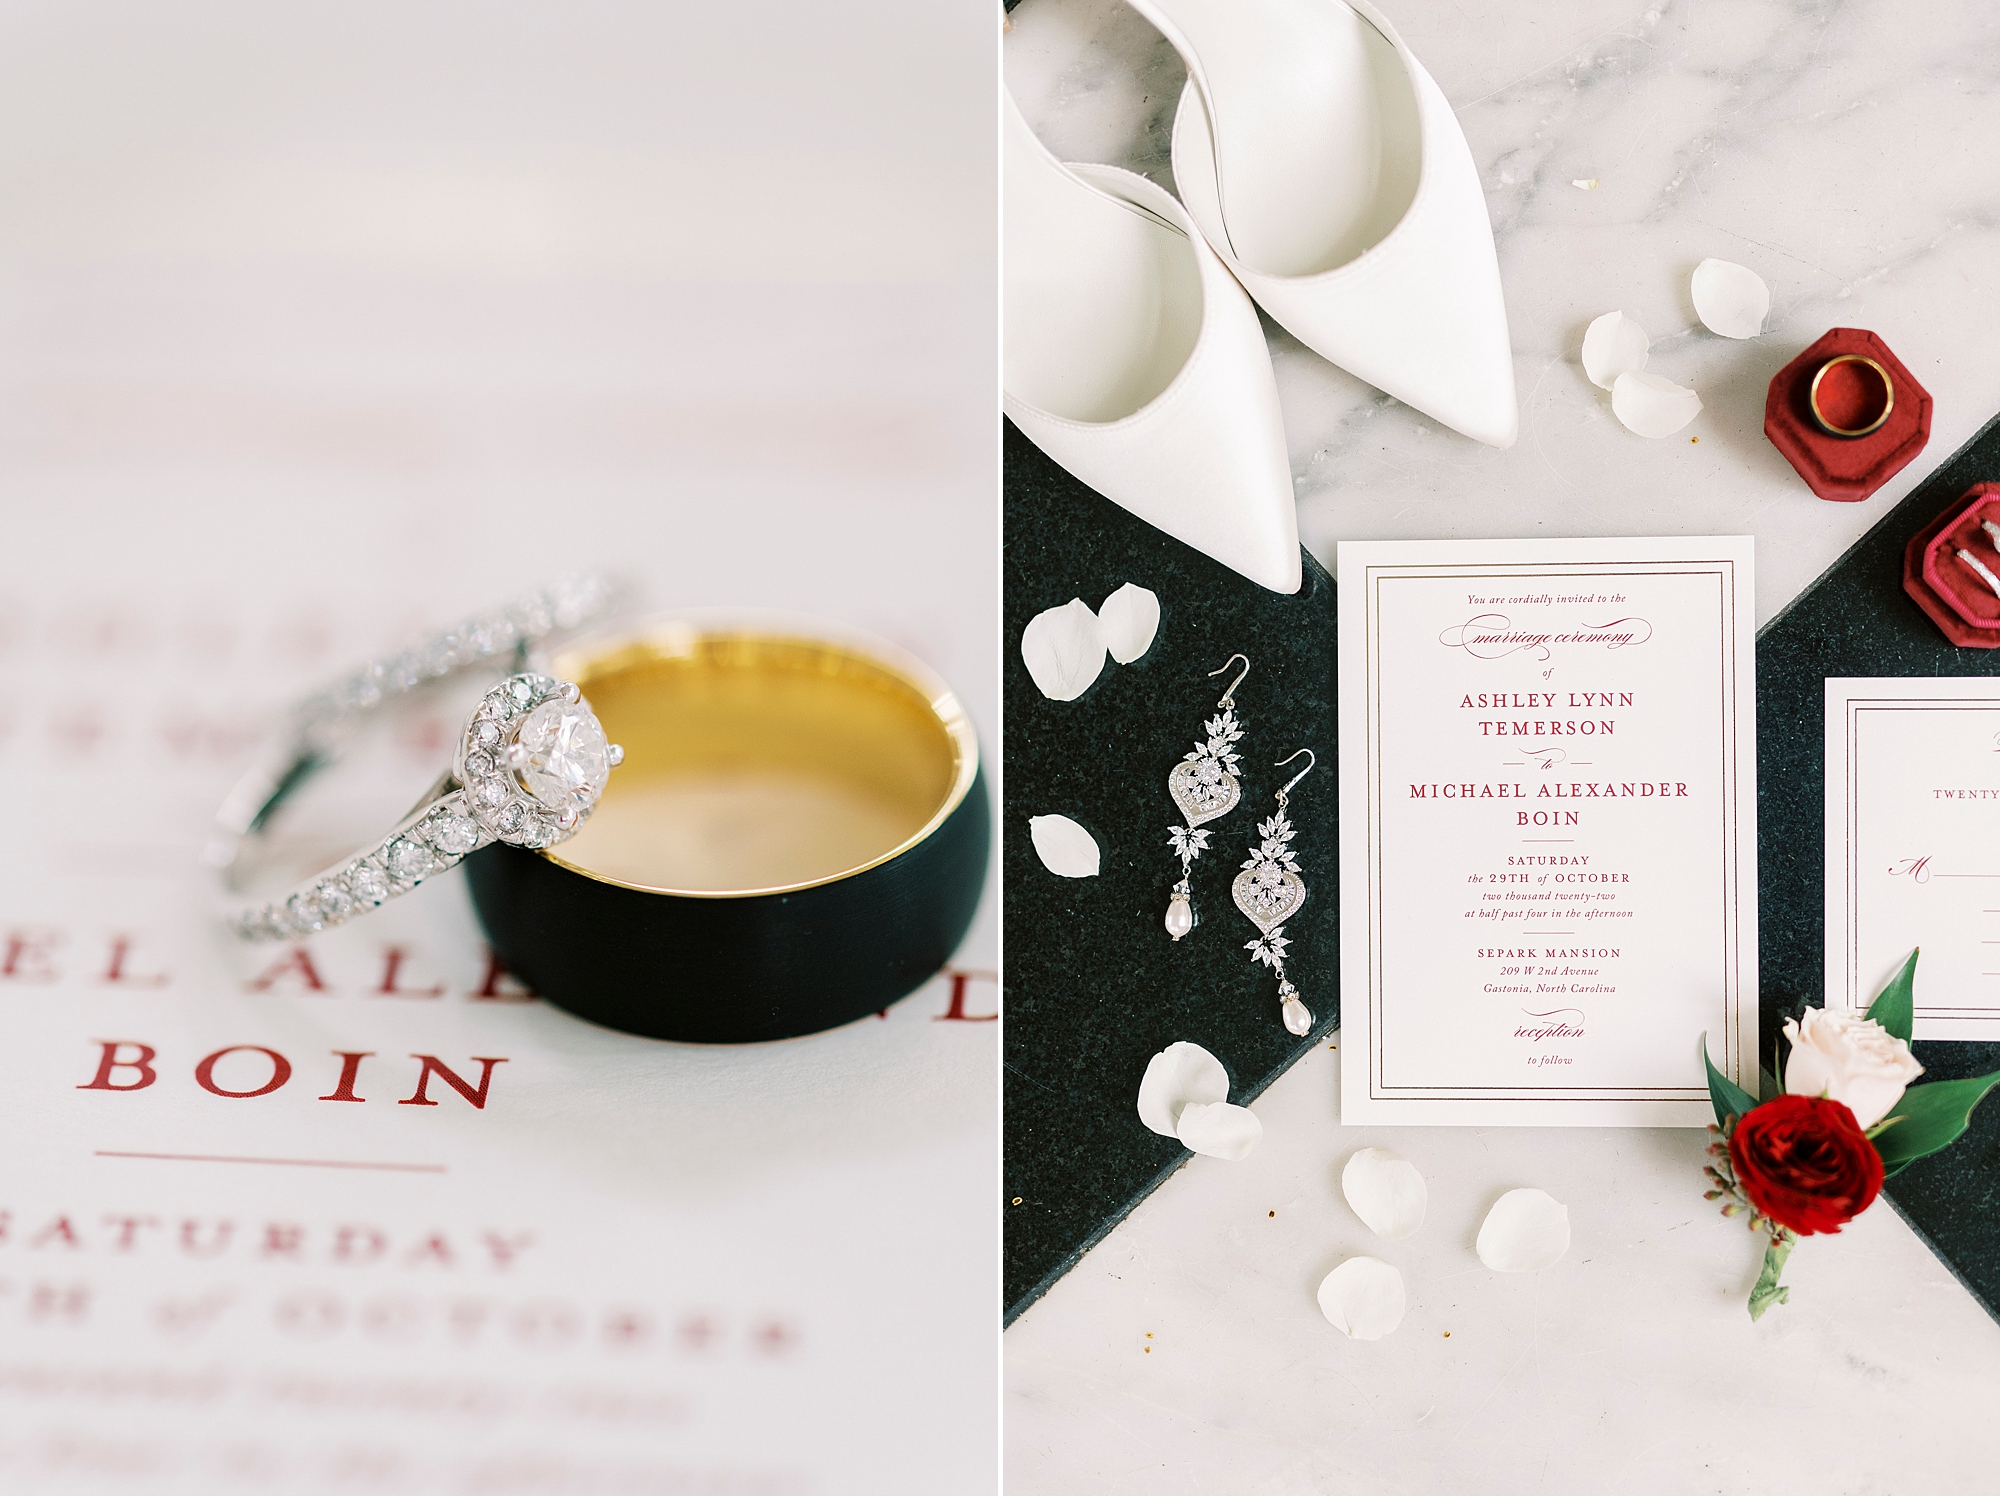 rings and invitation suite for fall wedding at Separk Mansion